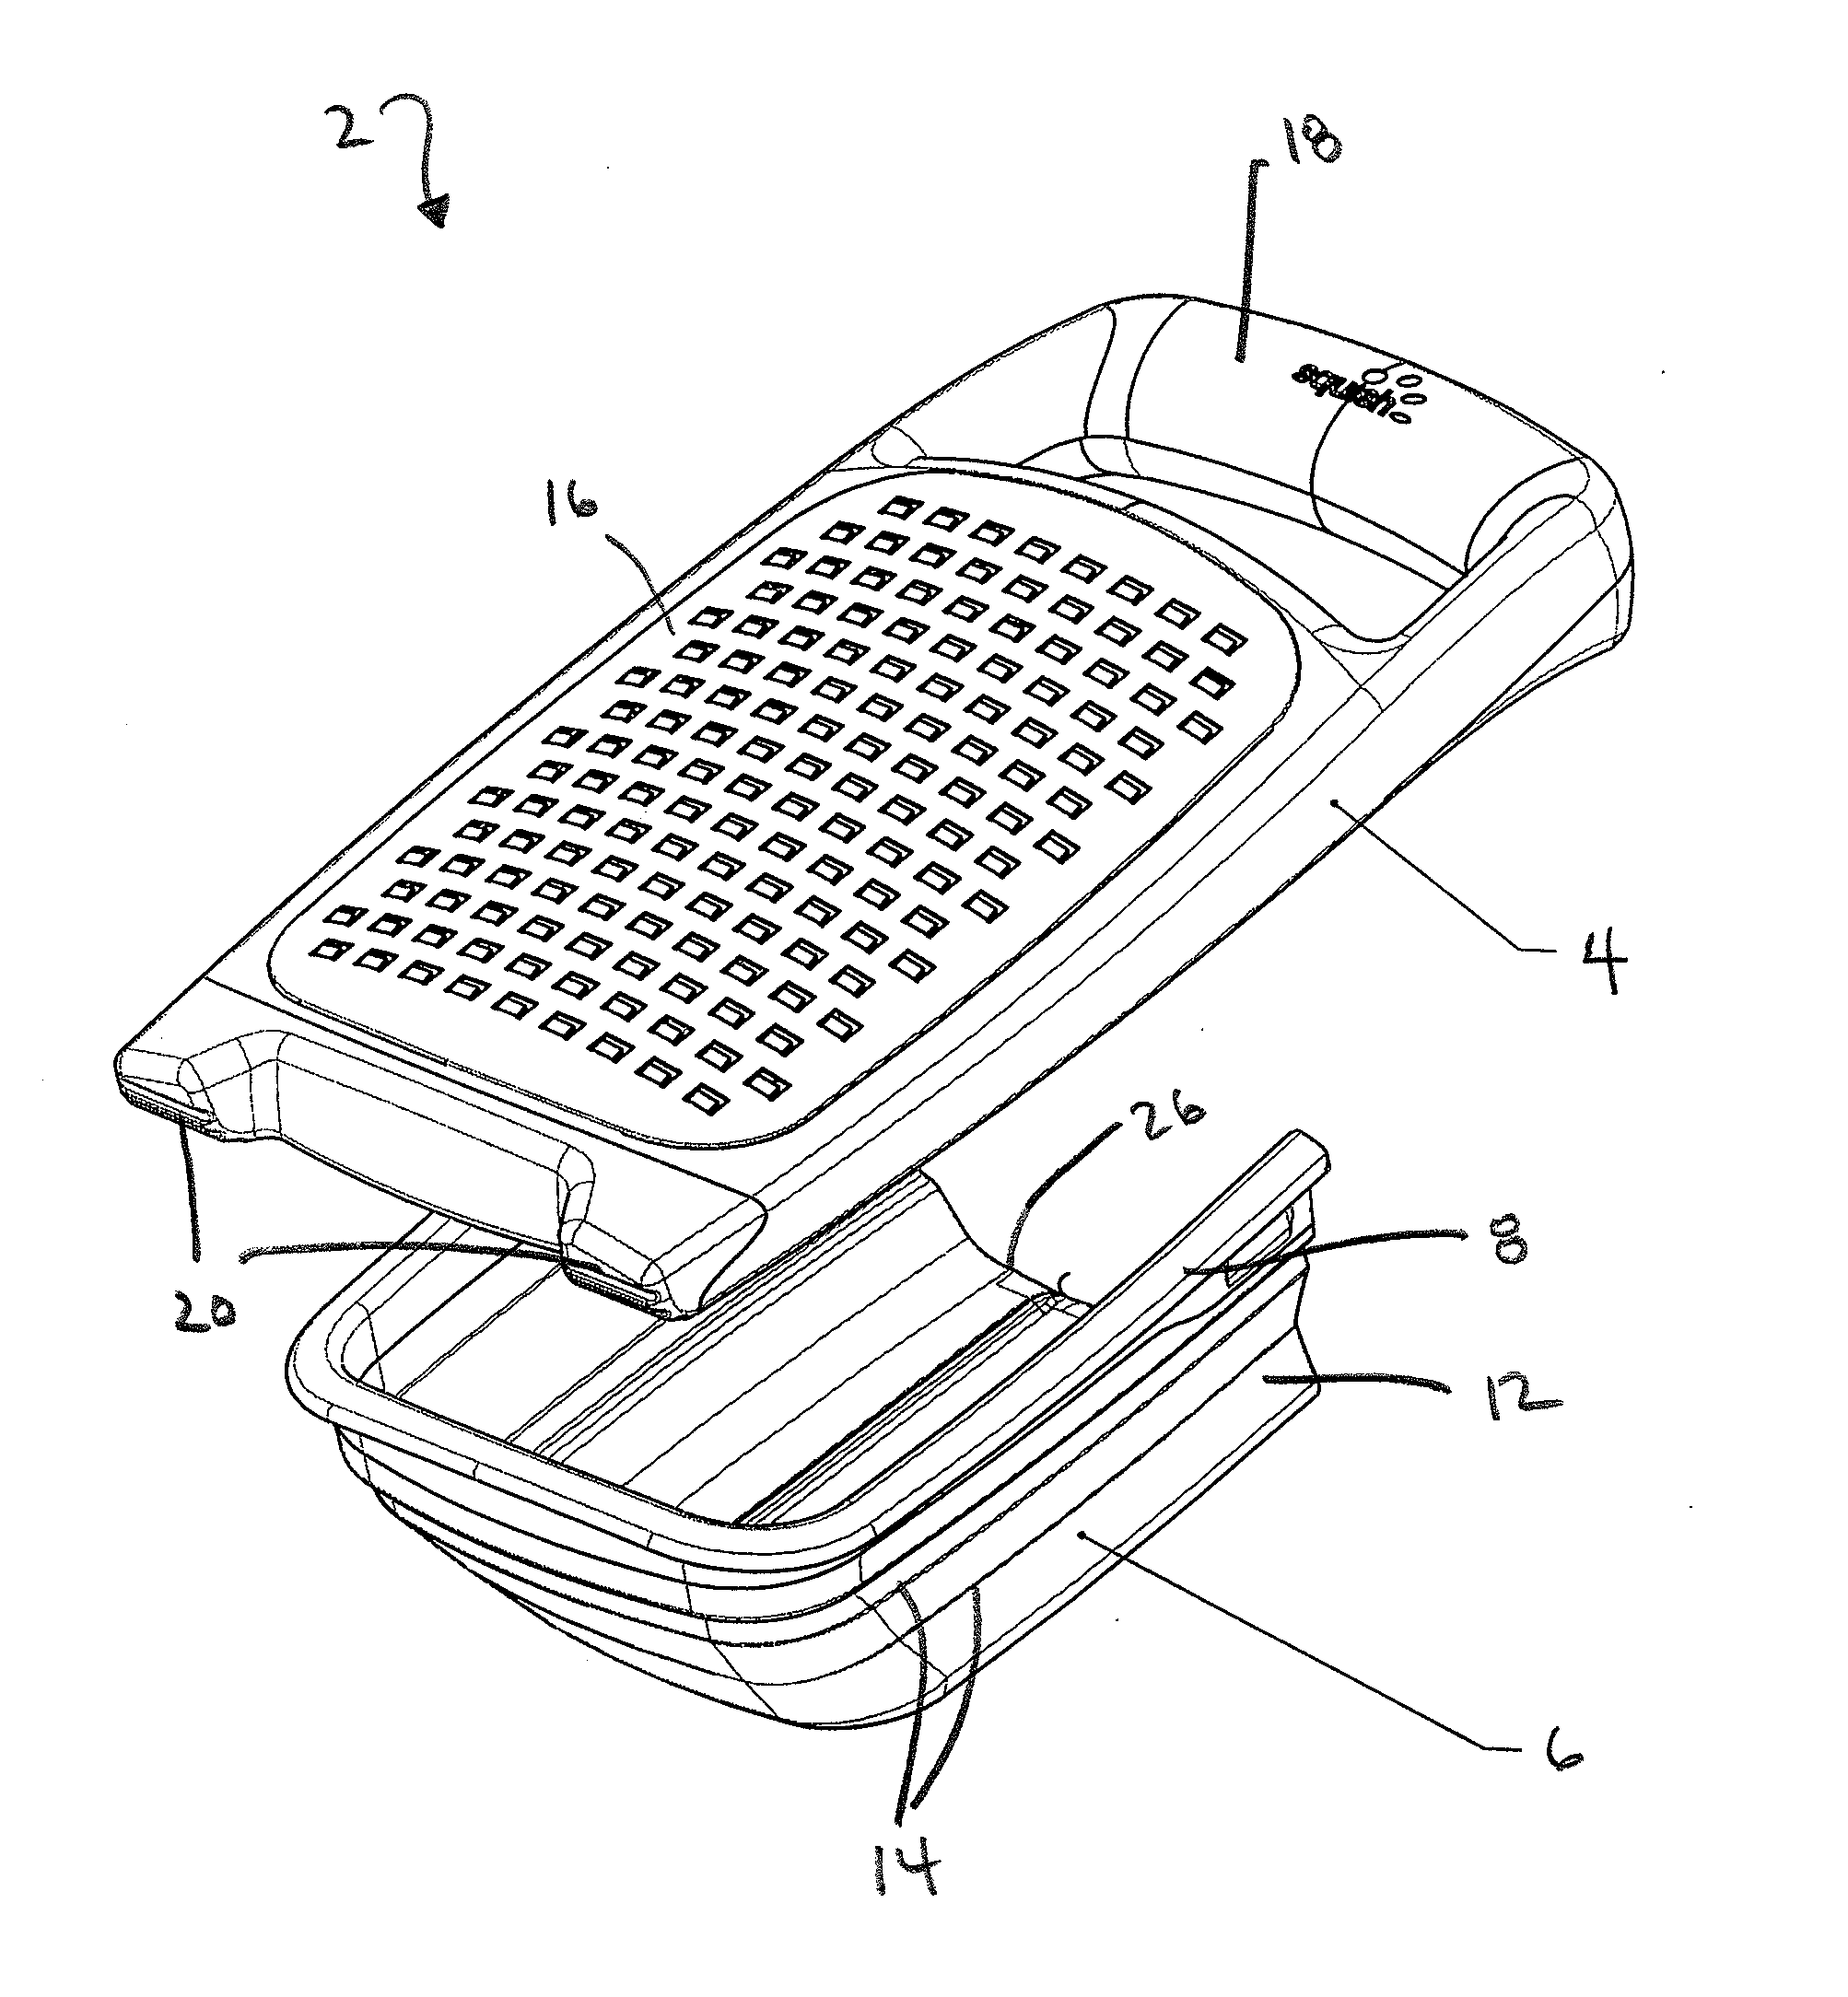 Handheld grater with catch bin